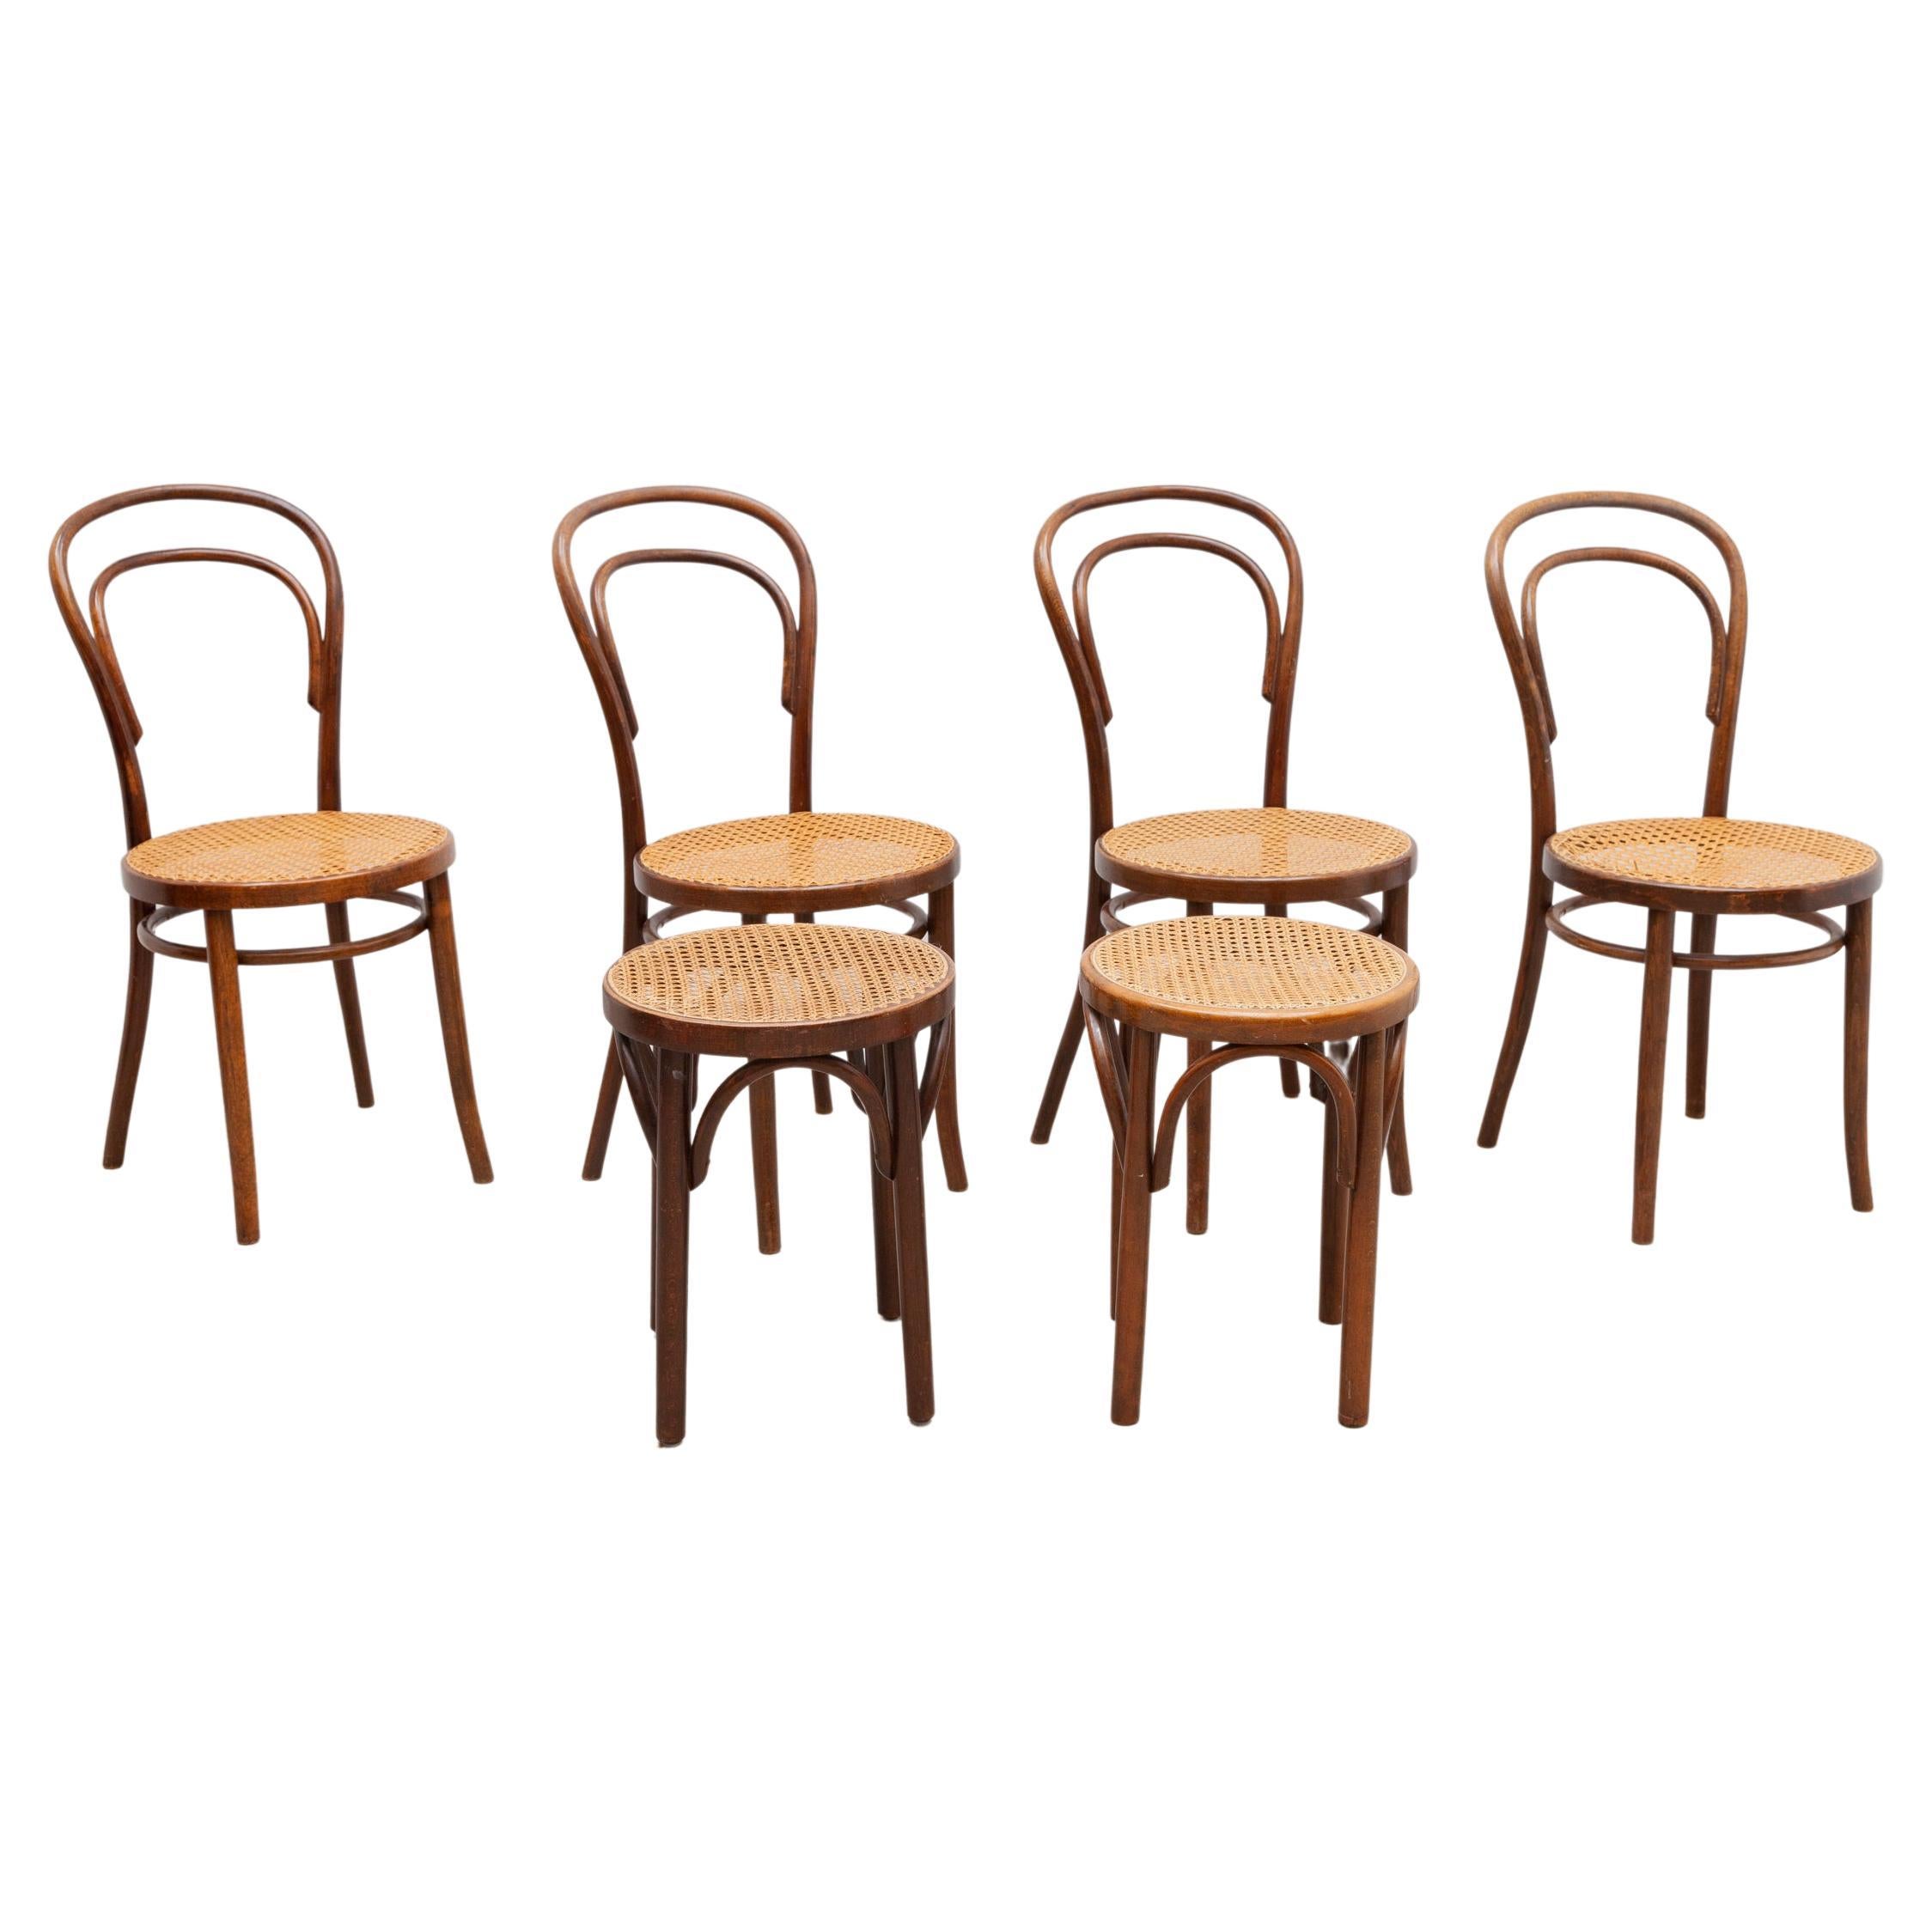 Thonet Set of Four No.14 Chairs and Two Stools, 1930s, Austria